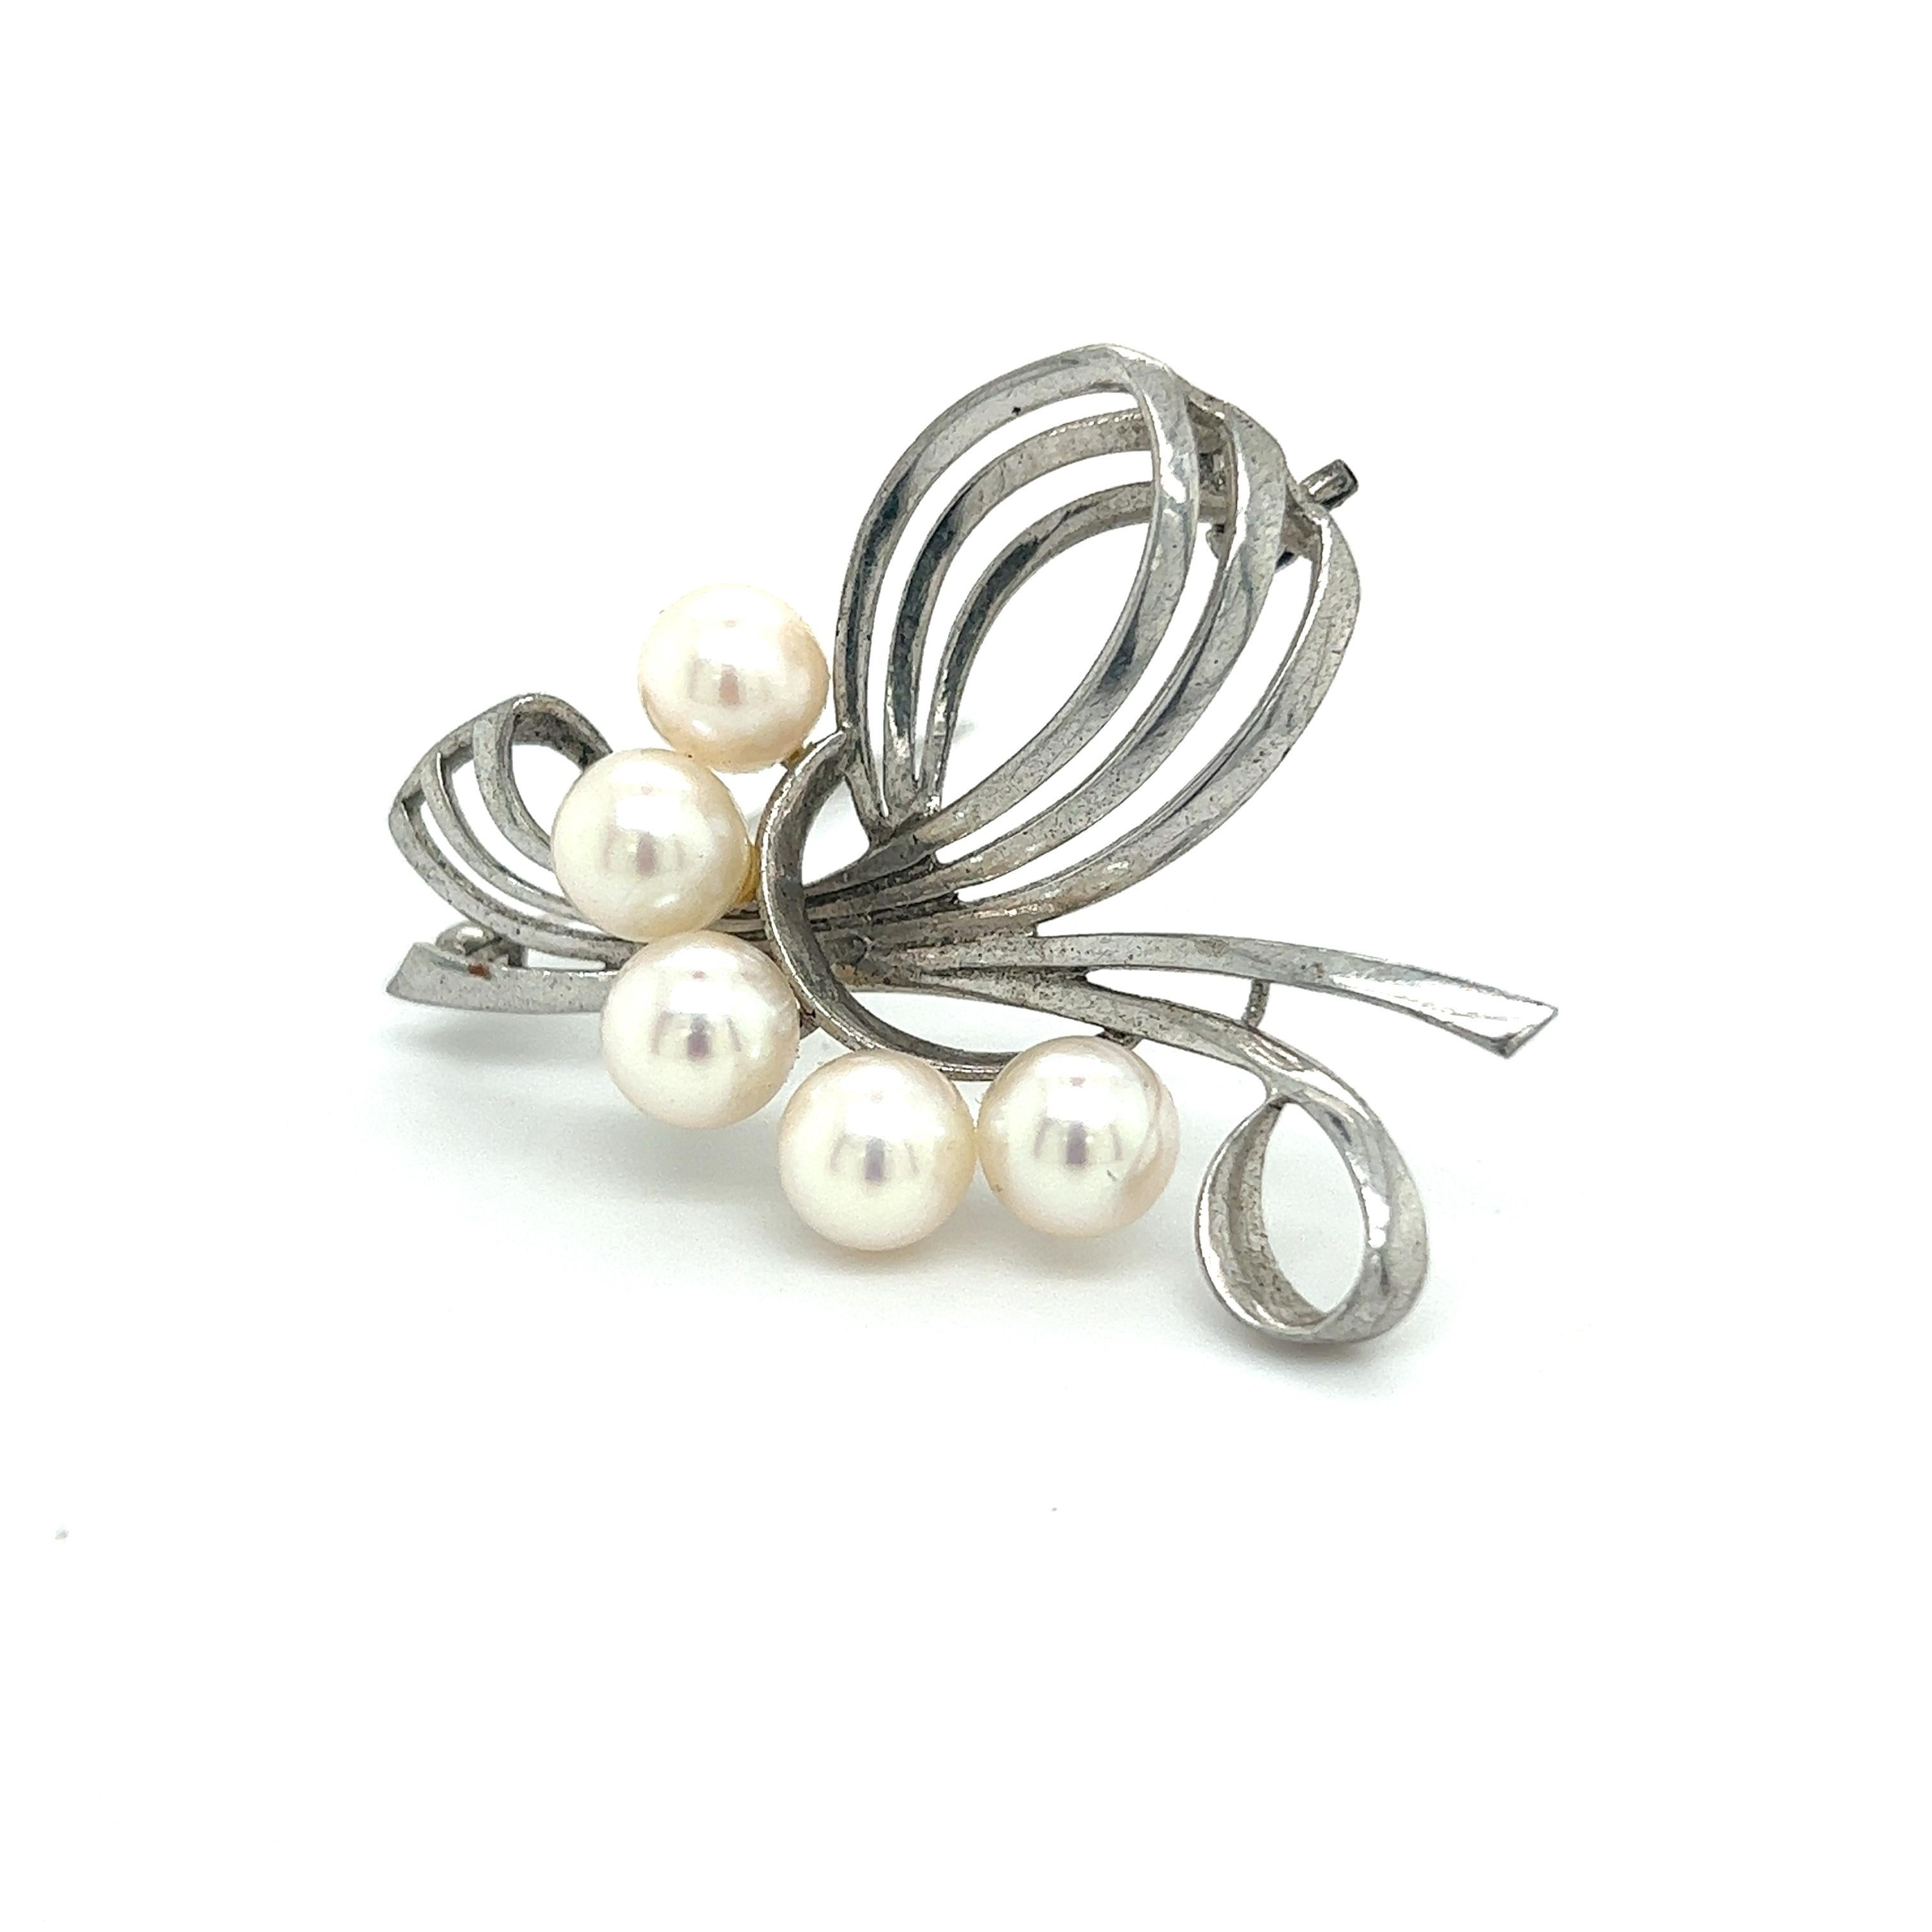 Mikimoto Estate Akoya Pearl Brooch Pin Sterling Silver 7 mm M289

This elegant Authentic Mikimoto Estate Akoya pearl brooch pin is made of sterling silver and has 5 Akoya Cultured Pearls ranging in size from 7 mm and a weight of 6.7 grams.

TRUSTED